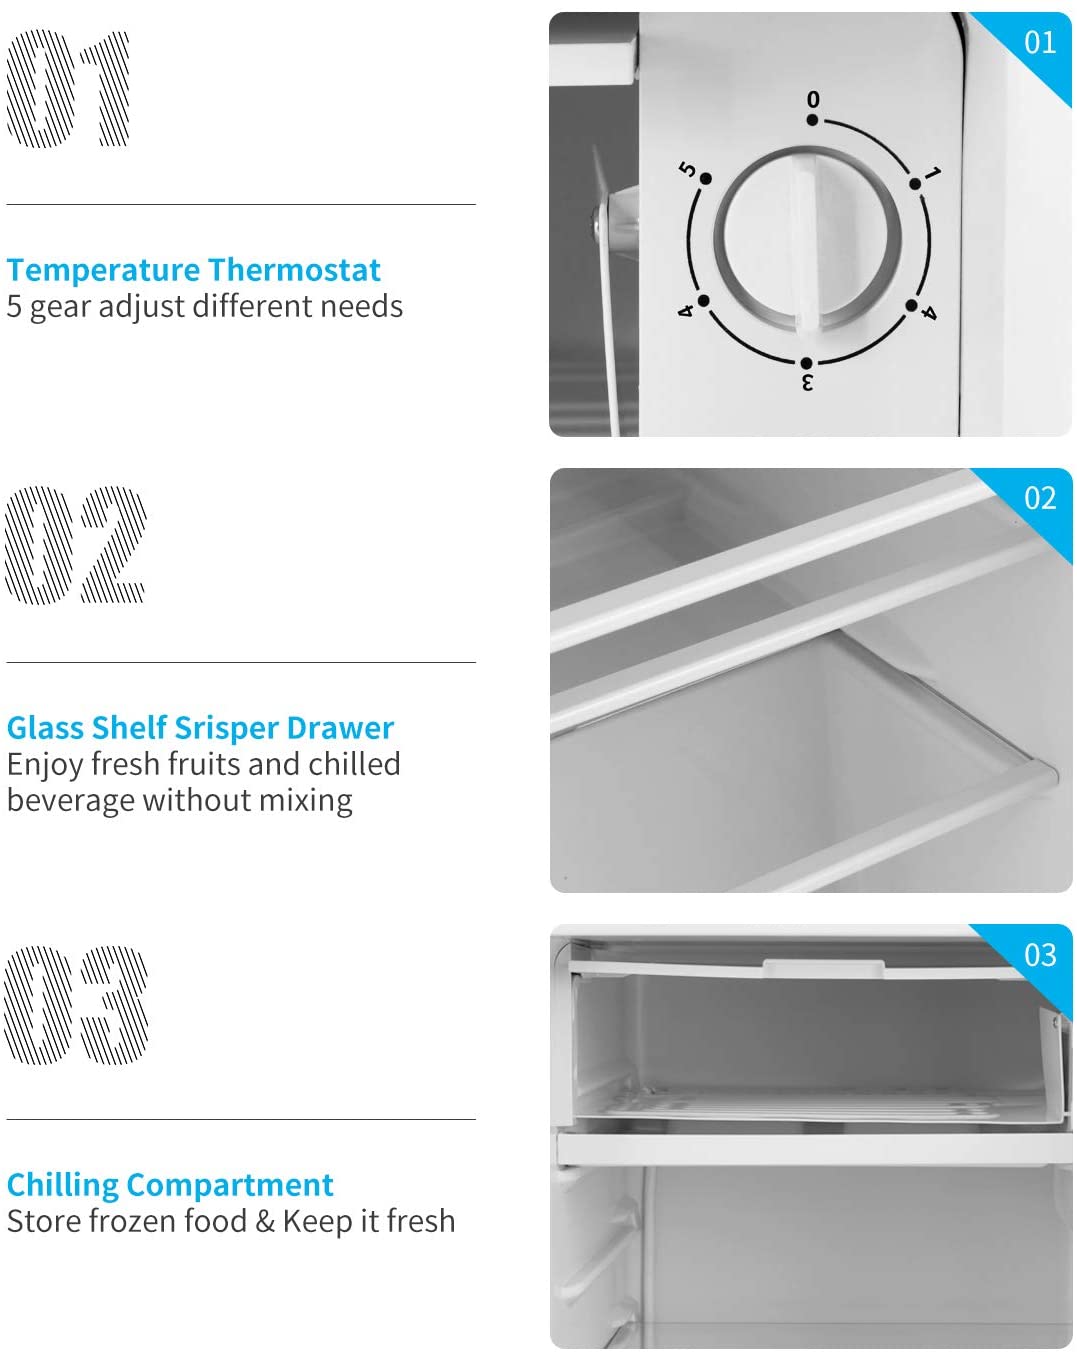 10 Best Garage Refrigerator 2022 Review: Best Second Mini Fridge with Freezer for Hot Summer/ Garage All In One Cooling Gear Lab: Any Refrigerators Air Conditioners Freezers Ice Makers Coolers Fans Reviewed And Compared.